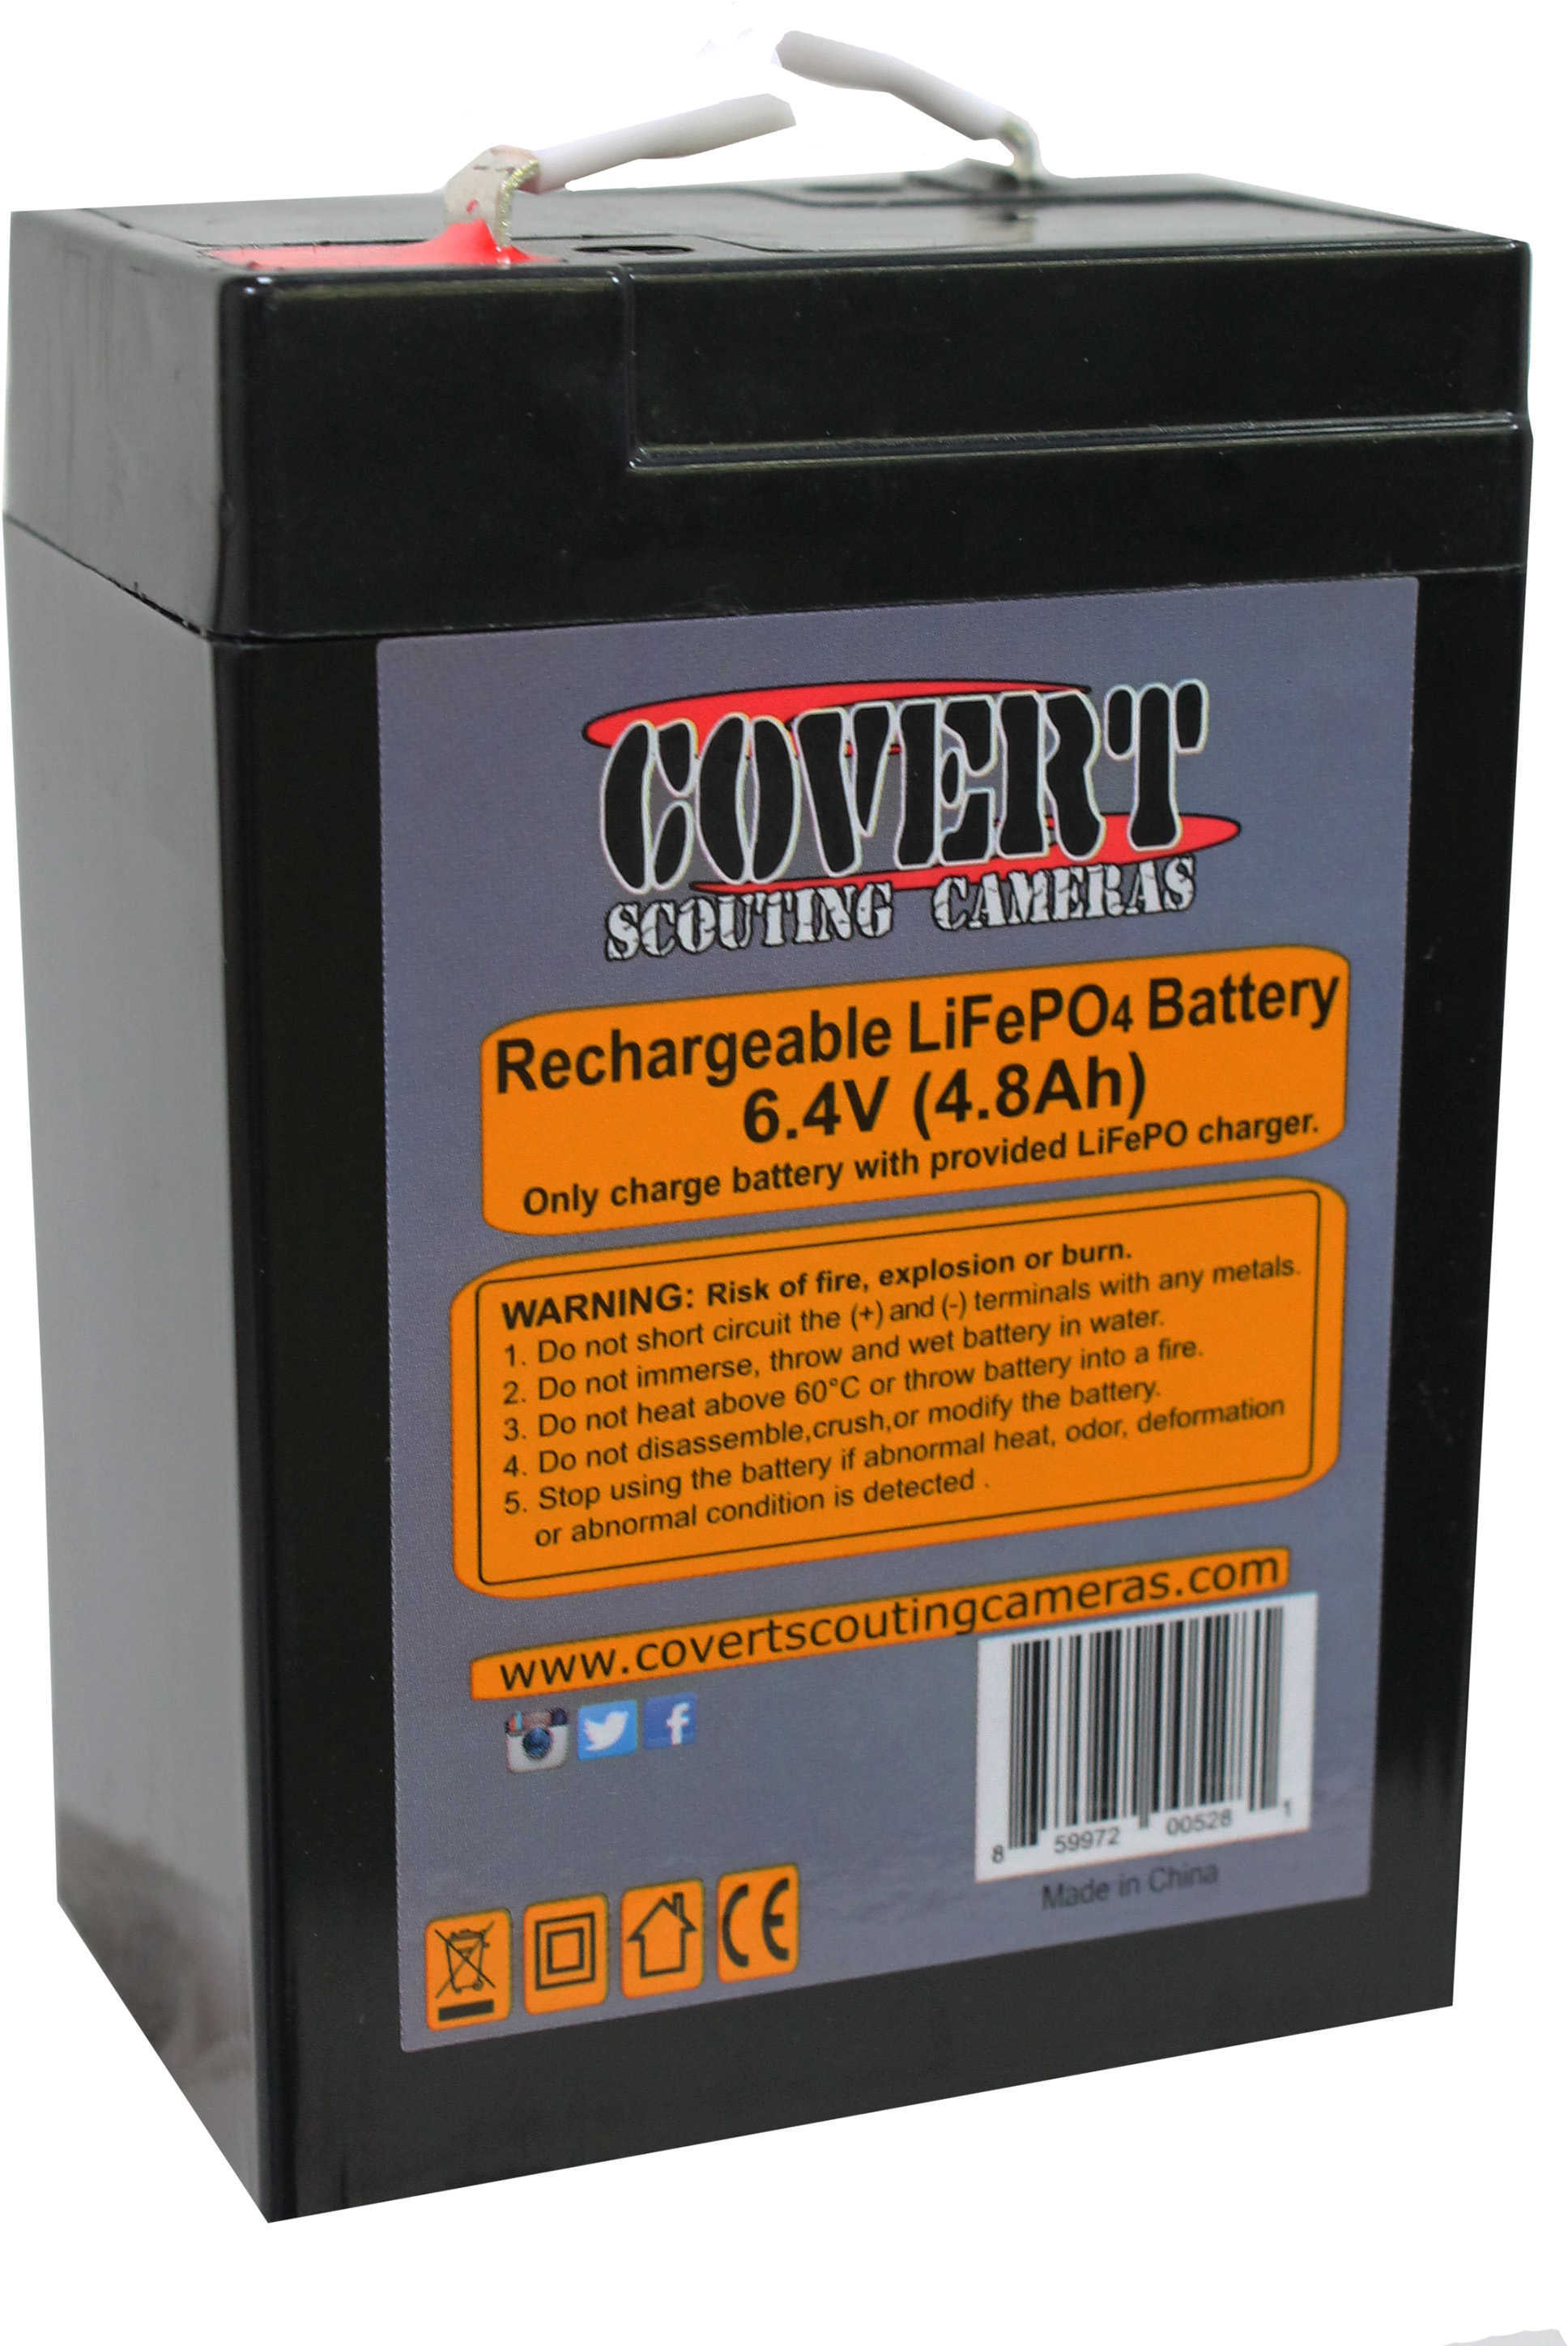 Covert Scouting Cameras LifePo4 2000 Cycle Lithium Poly Battery Md: 5281